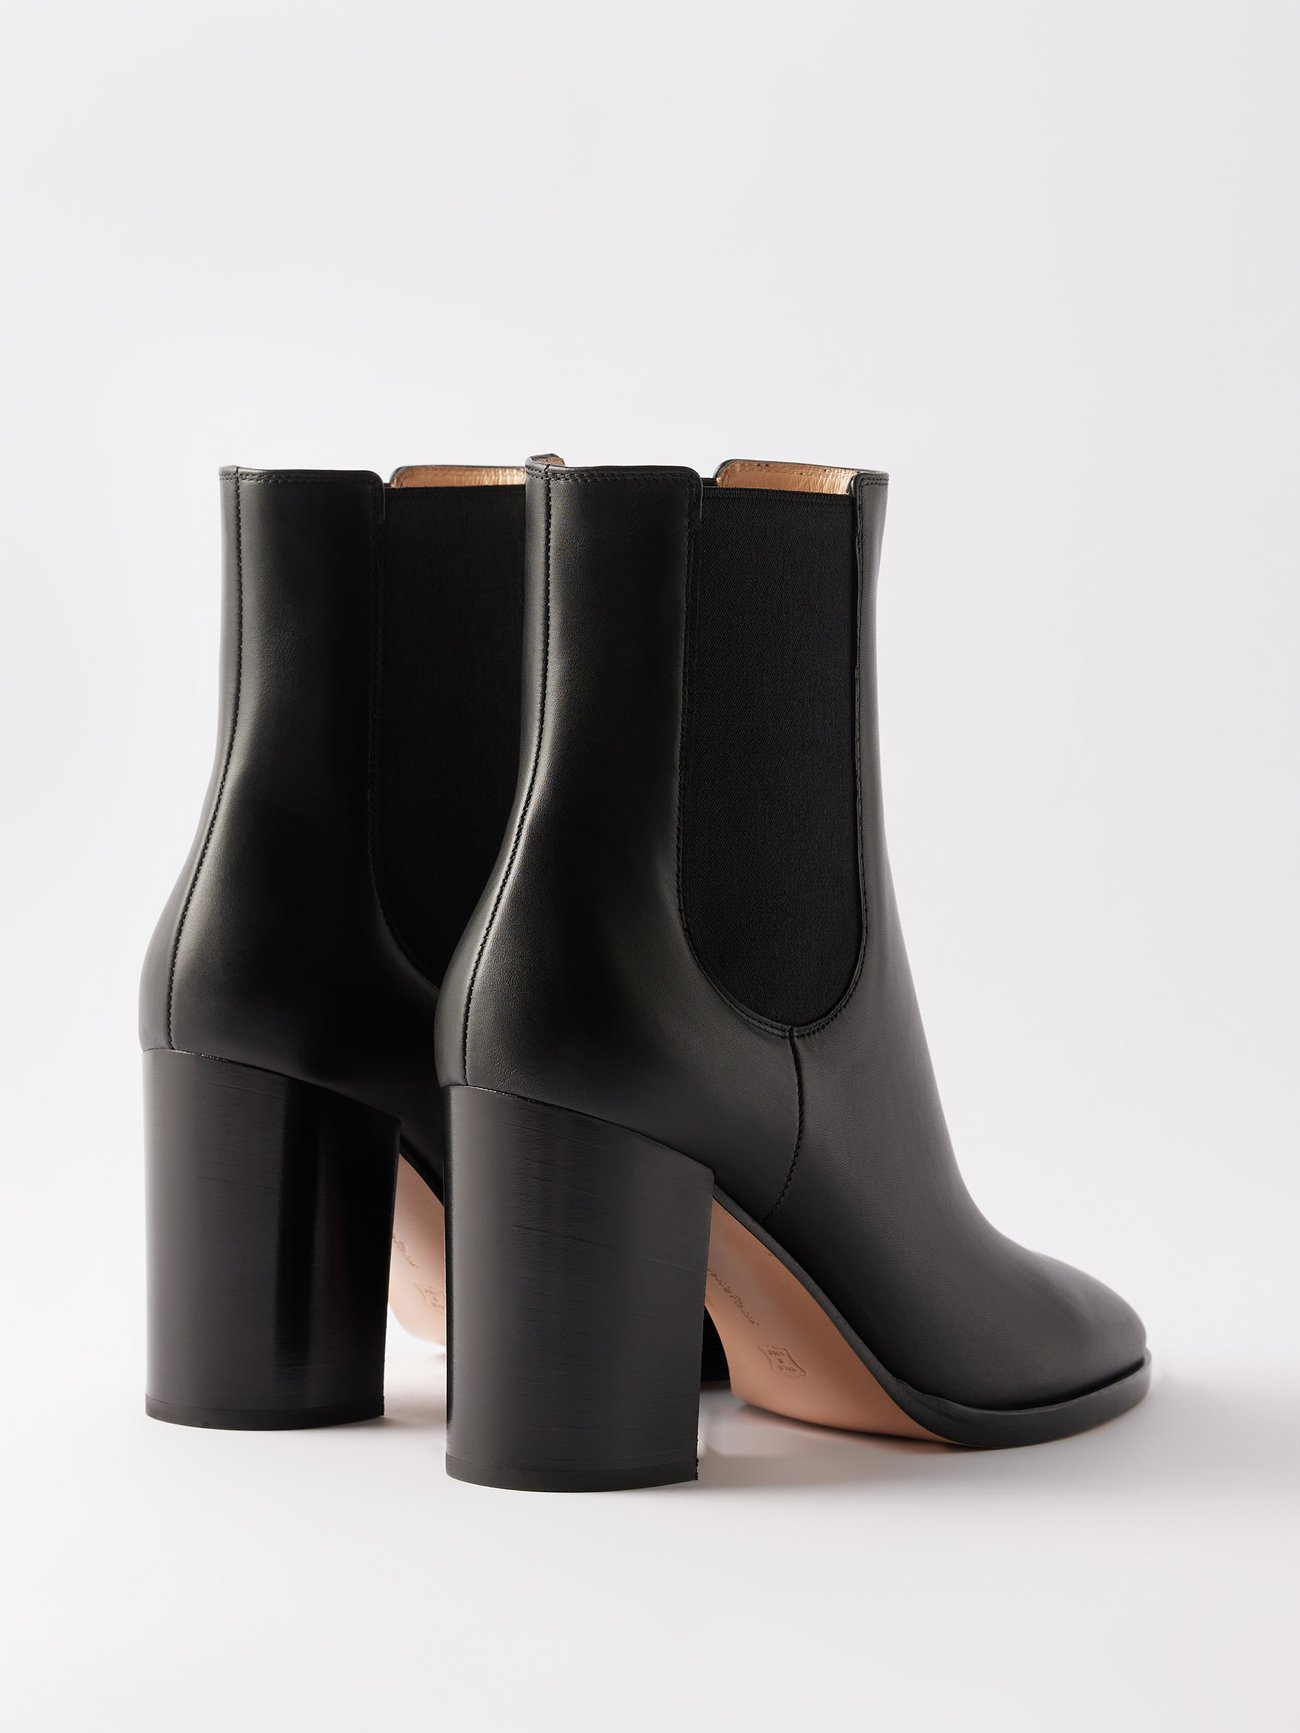 Black Joelle 85 leather Chelsea boots | Gianvito Rossi | MATCHES UK